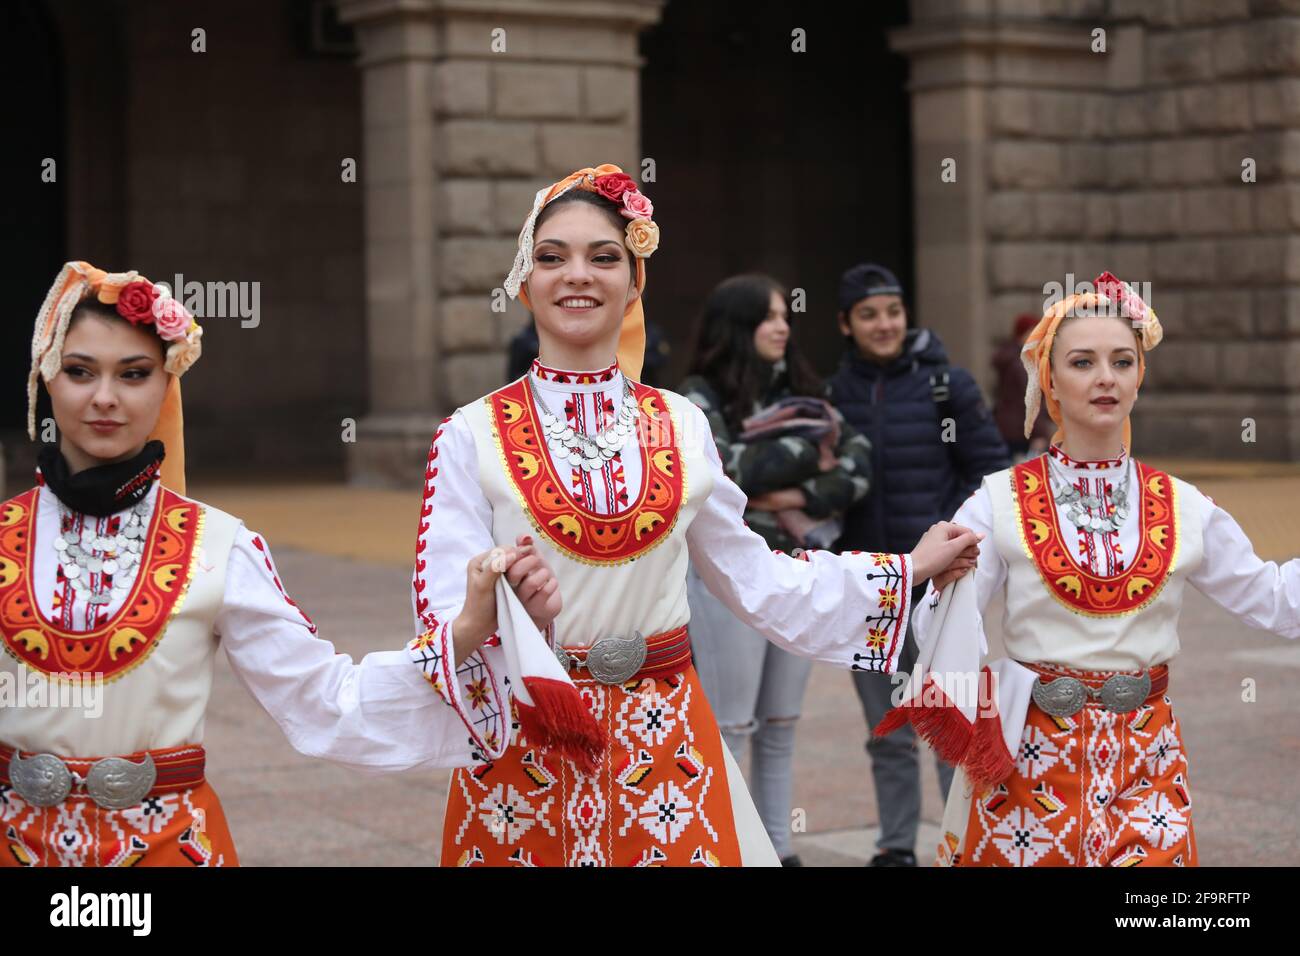 People in traditional folk costumes perform the Bulgarian folk dance "Horo" in the center of Sofia, Bulgaria Stock Photo